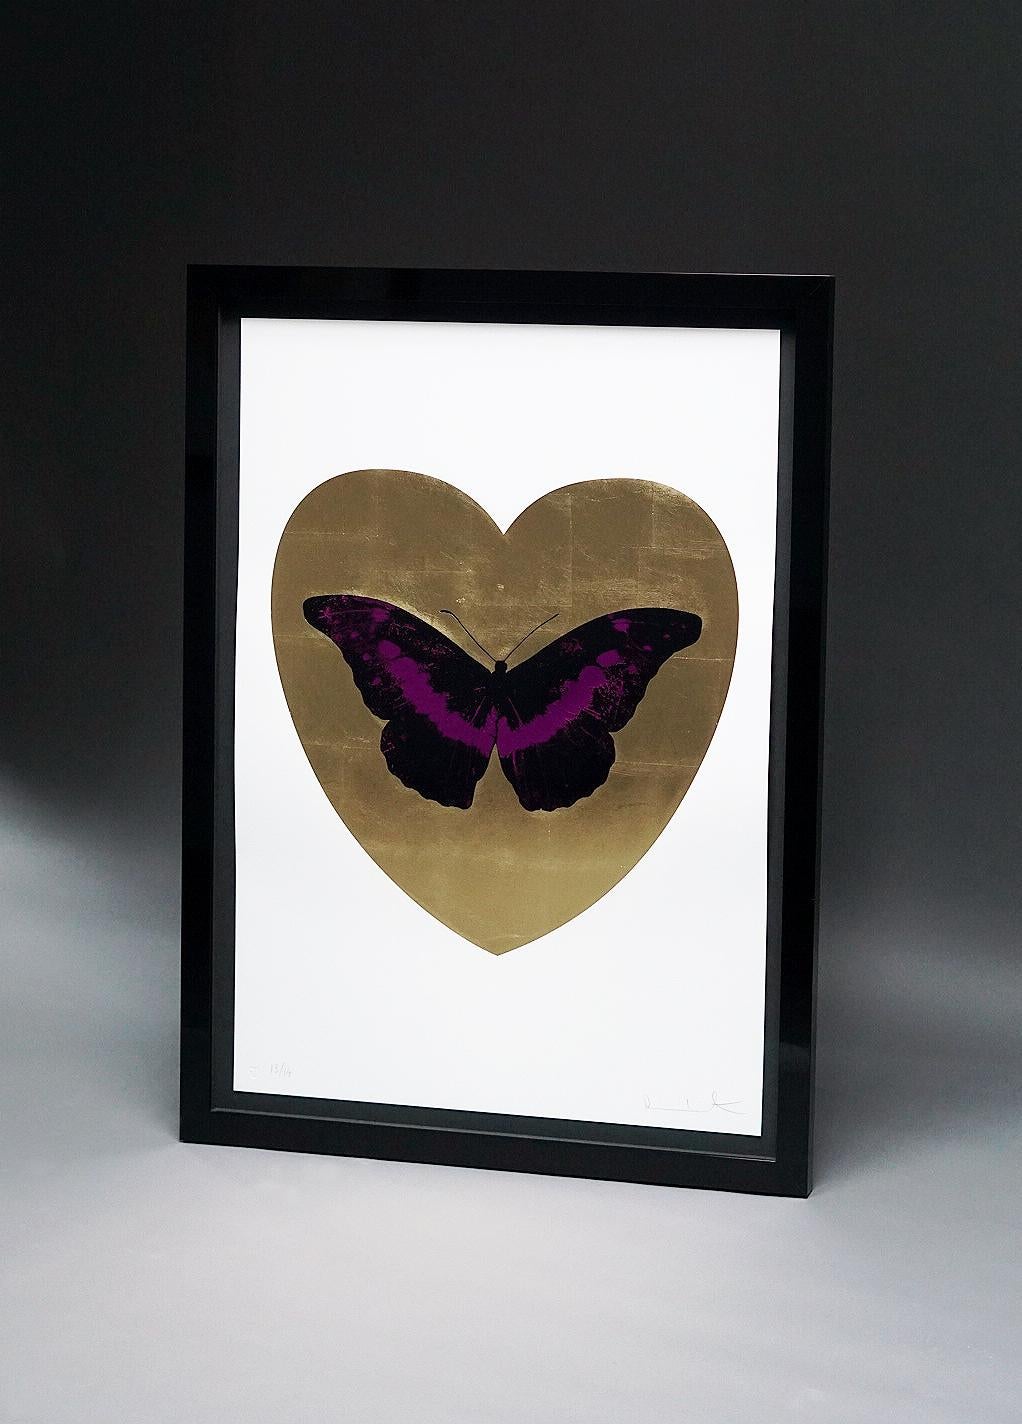 The 'I Love You' Butterfly in Fuchsia and gold color scheme is a limited edition silkscreen print by Damien Hirst. This uplifting and pop art work features a fuchsia and black foil-block butterfly over a gilded 24K gold leaf heart, surrounded by a